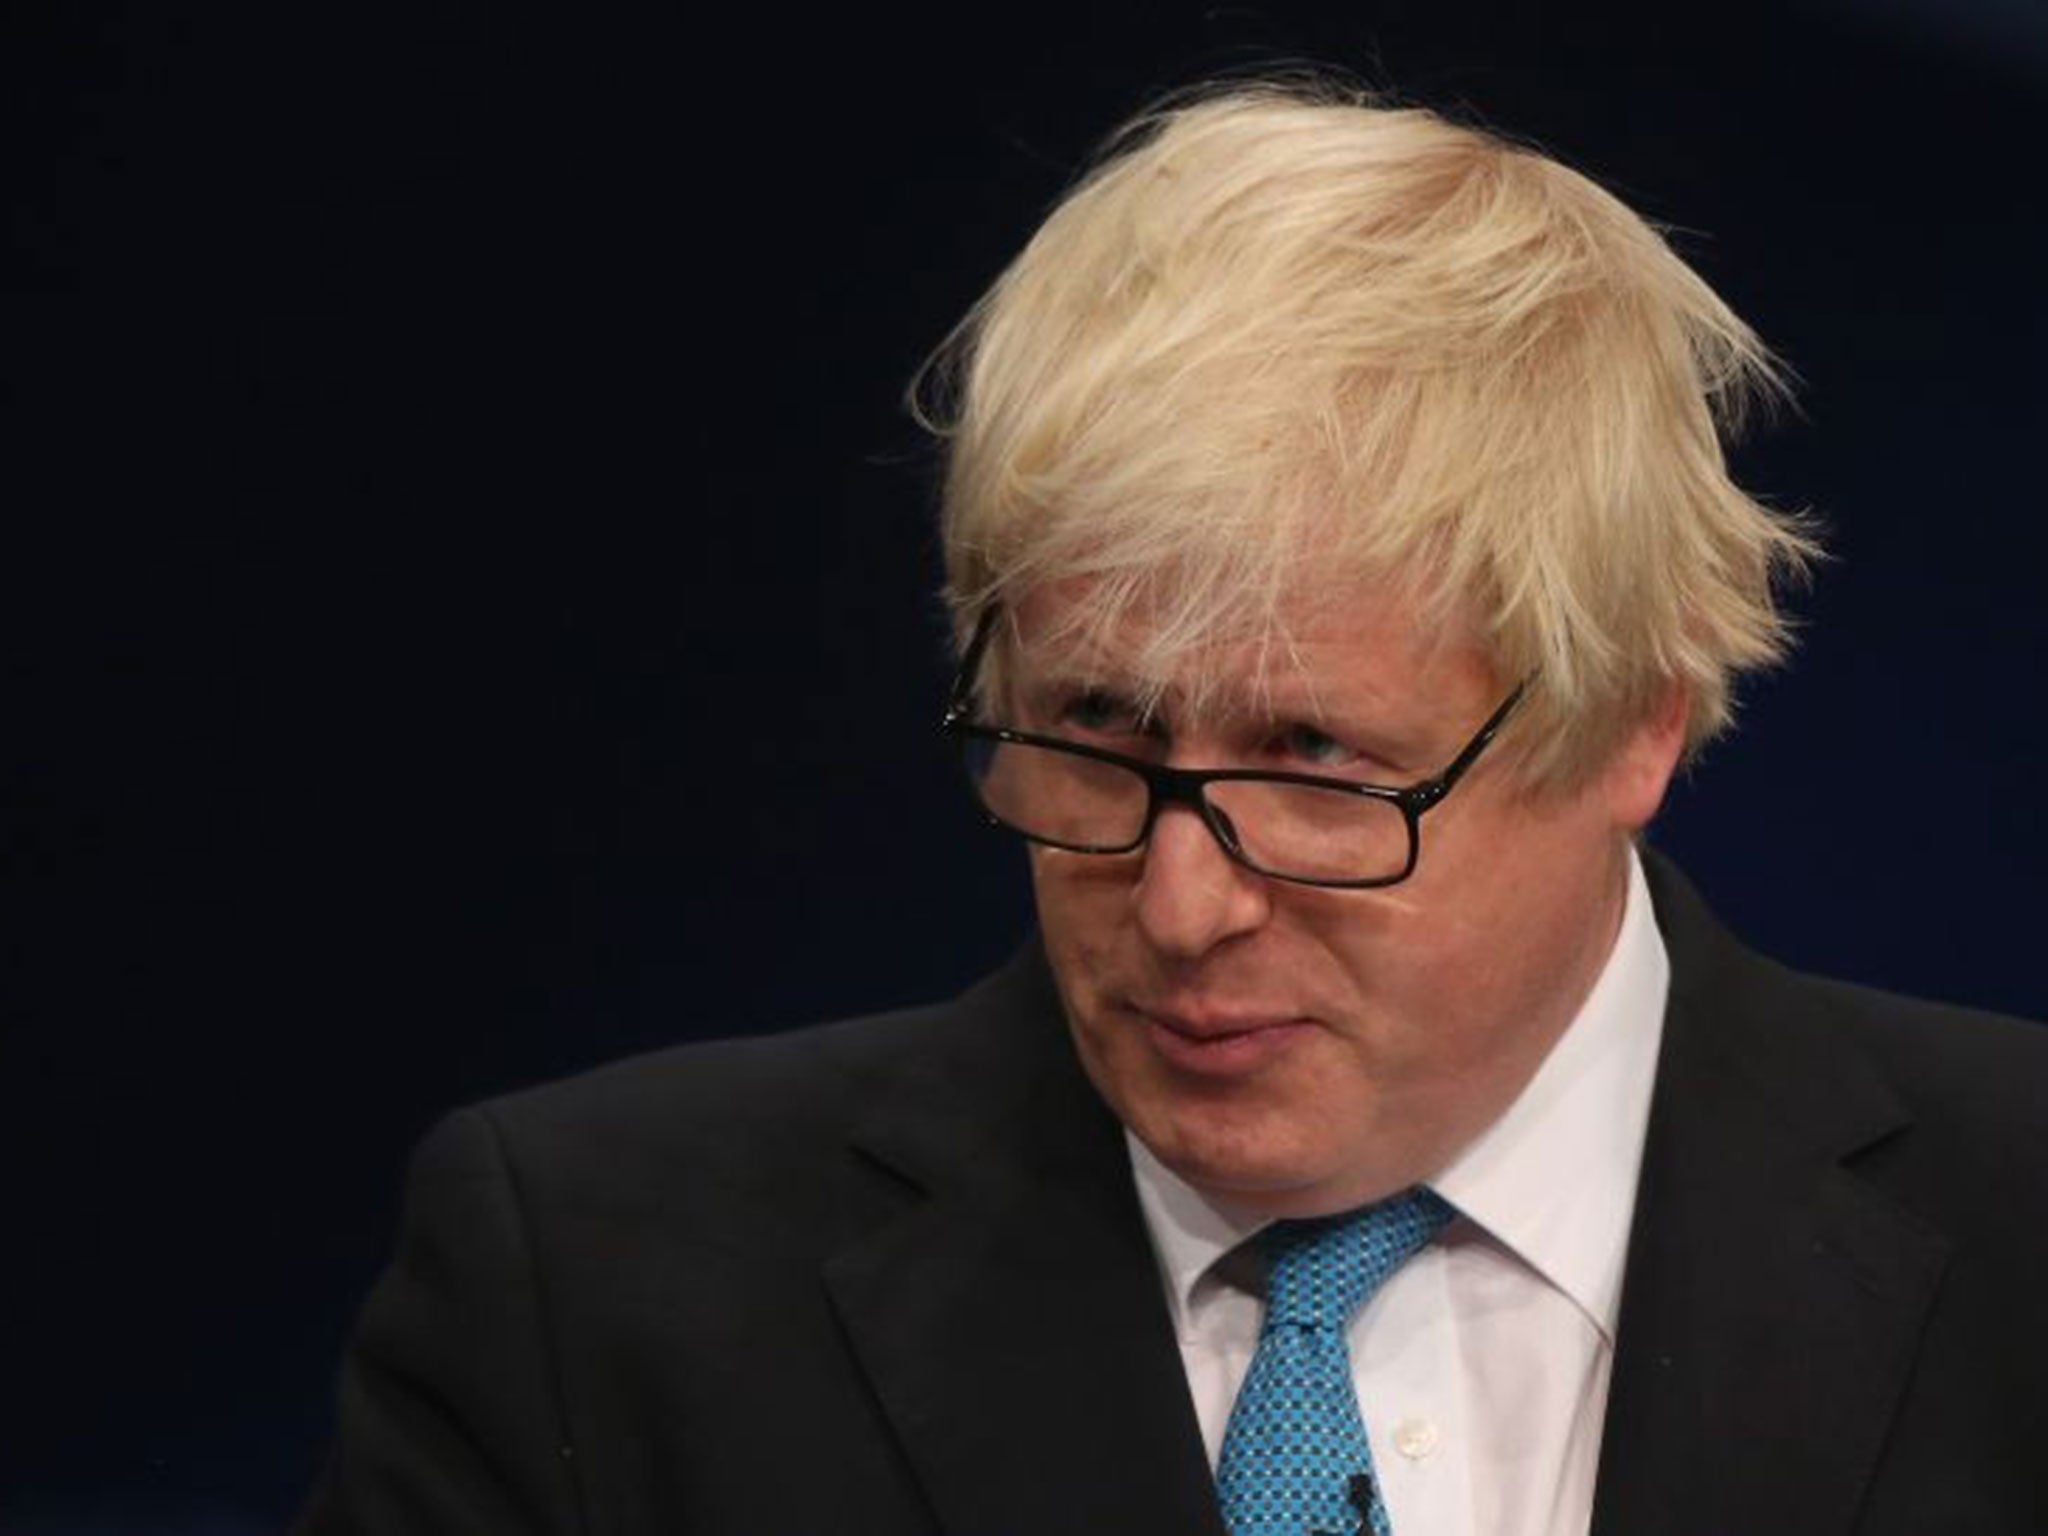 Johnson would doubtless love the responsibility and the publicity that goes with a senior cabinet job